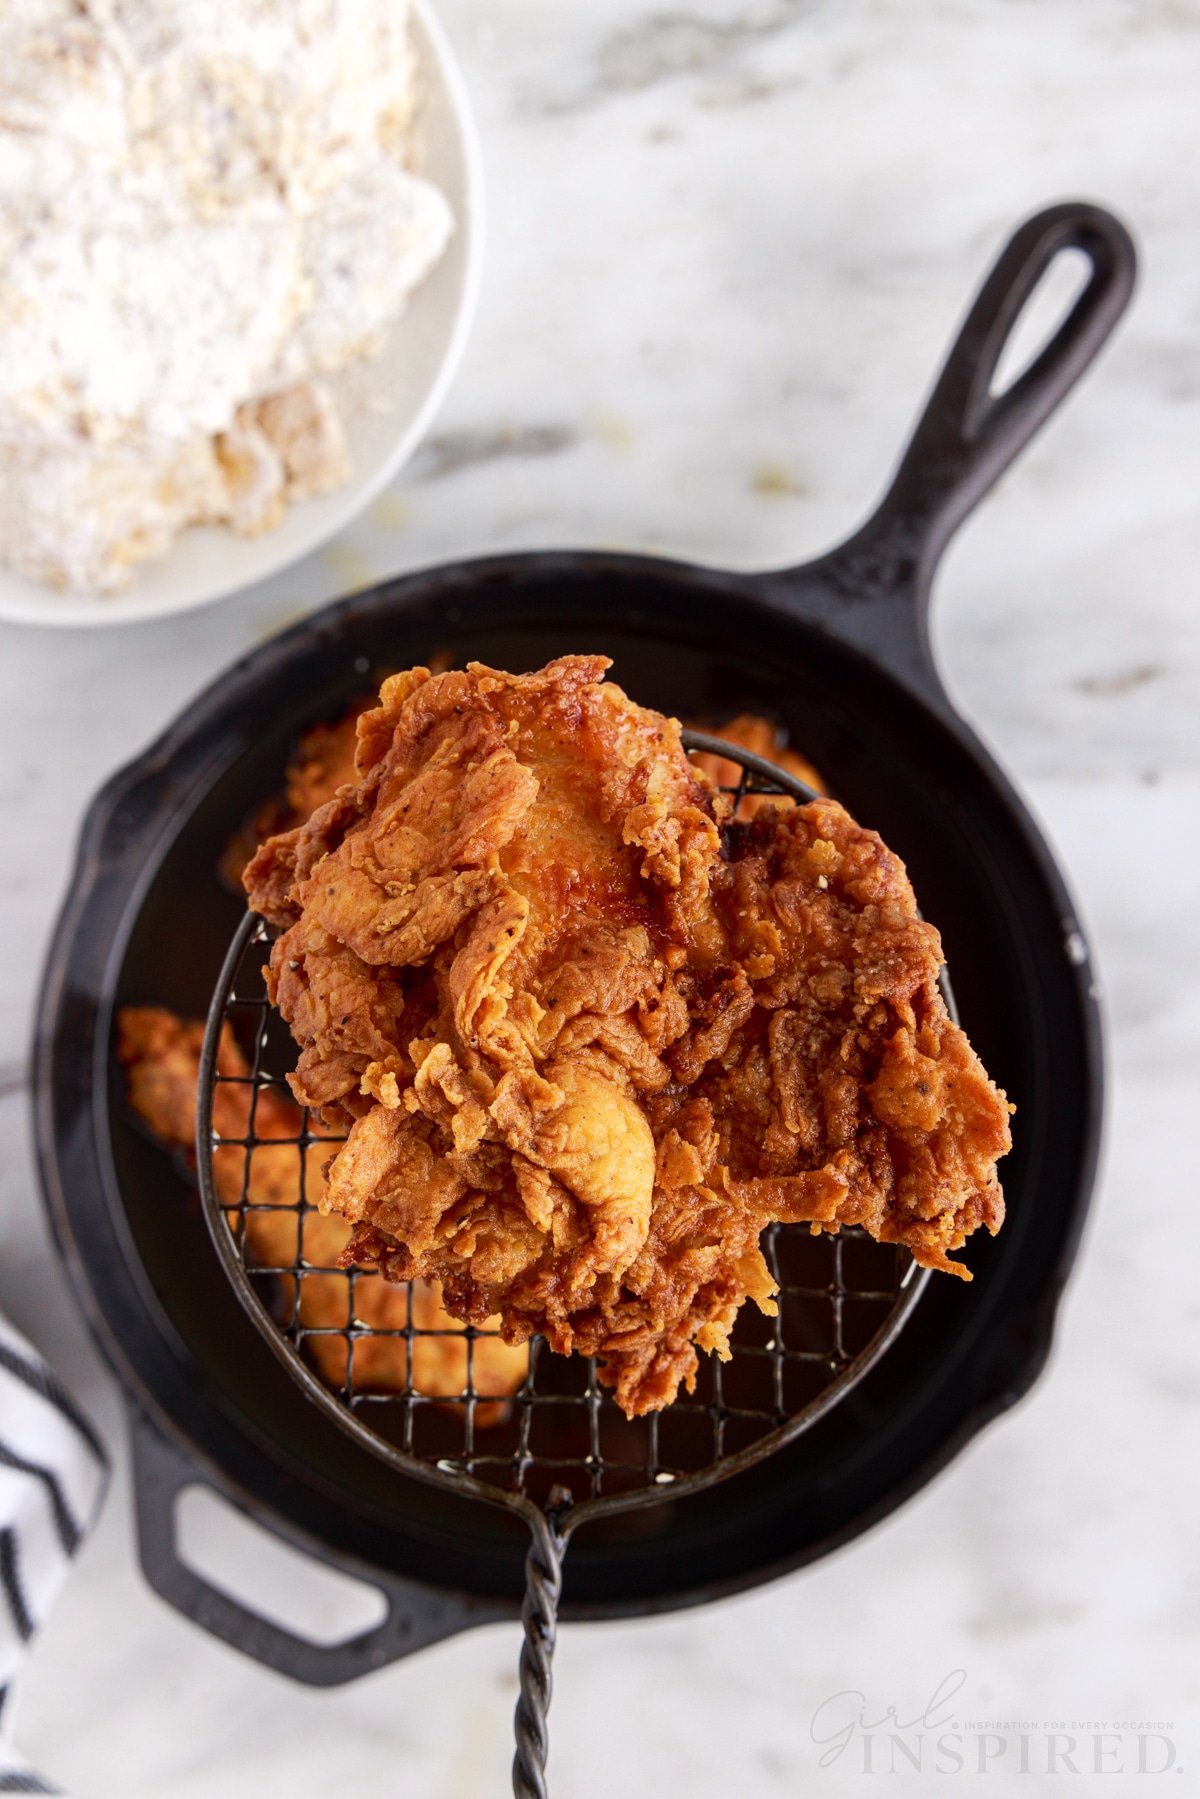 Fully deep fried chicken pieces lifted out of the Dutch oven with a slotted spoon, bowl of freshly battered chicken pieces, navy striped linen on a white marble surface.